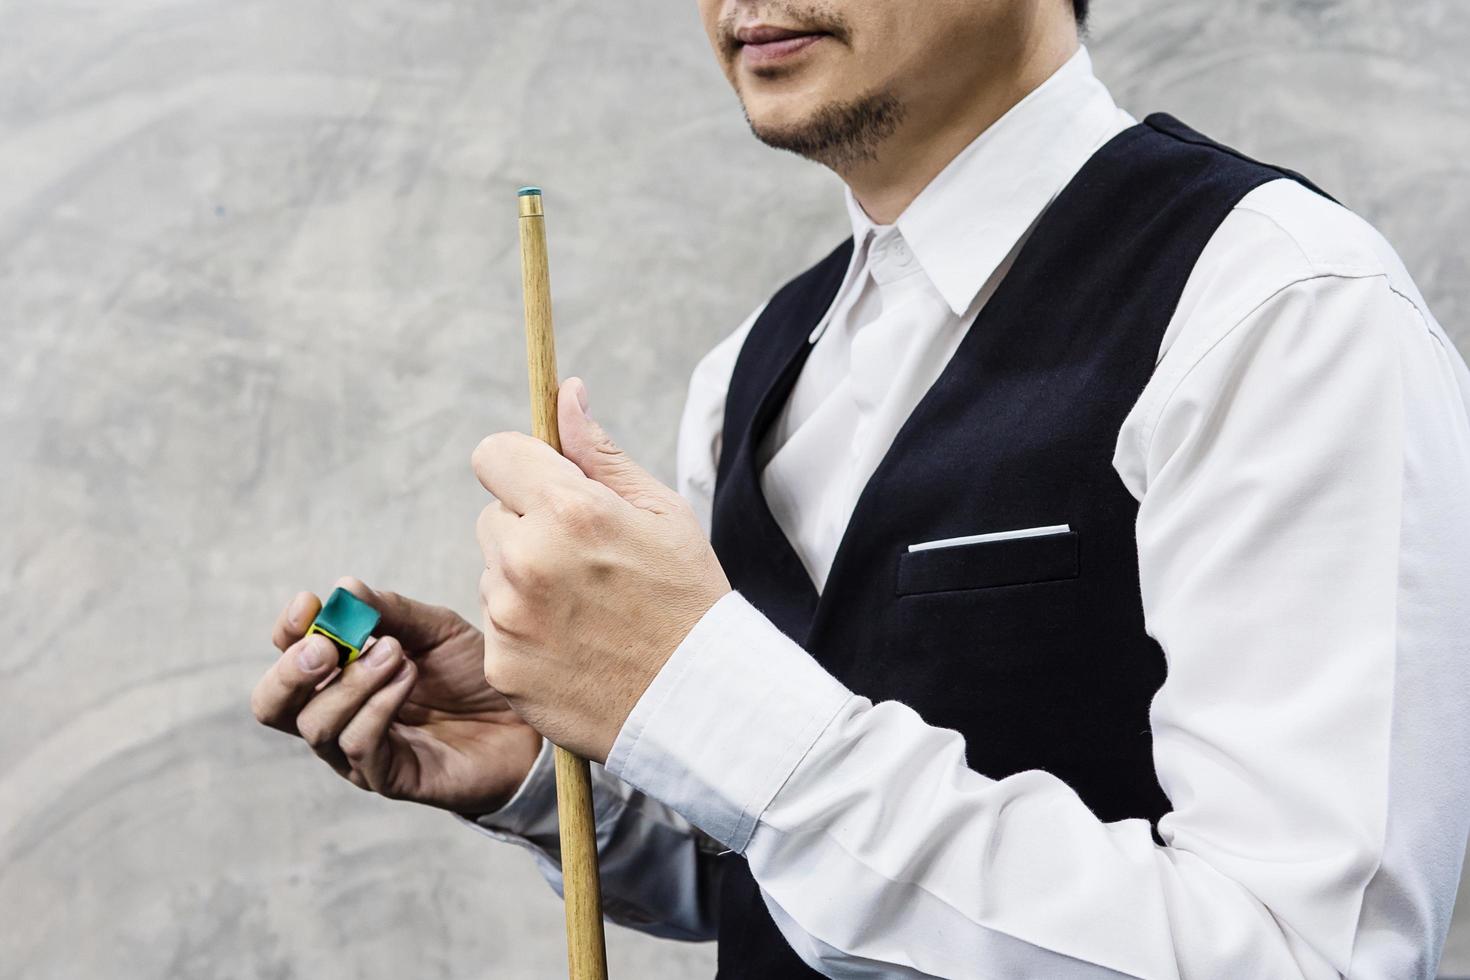 Snooker player standing waiting hold his cue stick and chalk prepare for his turn during competition match photo